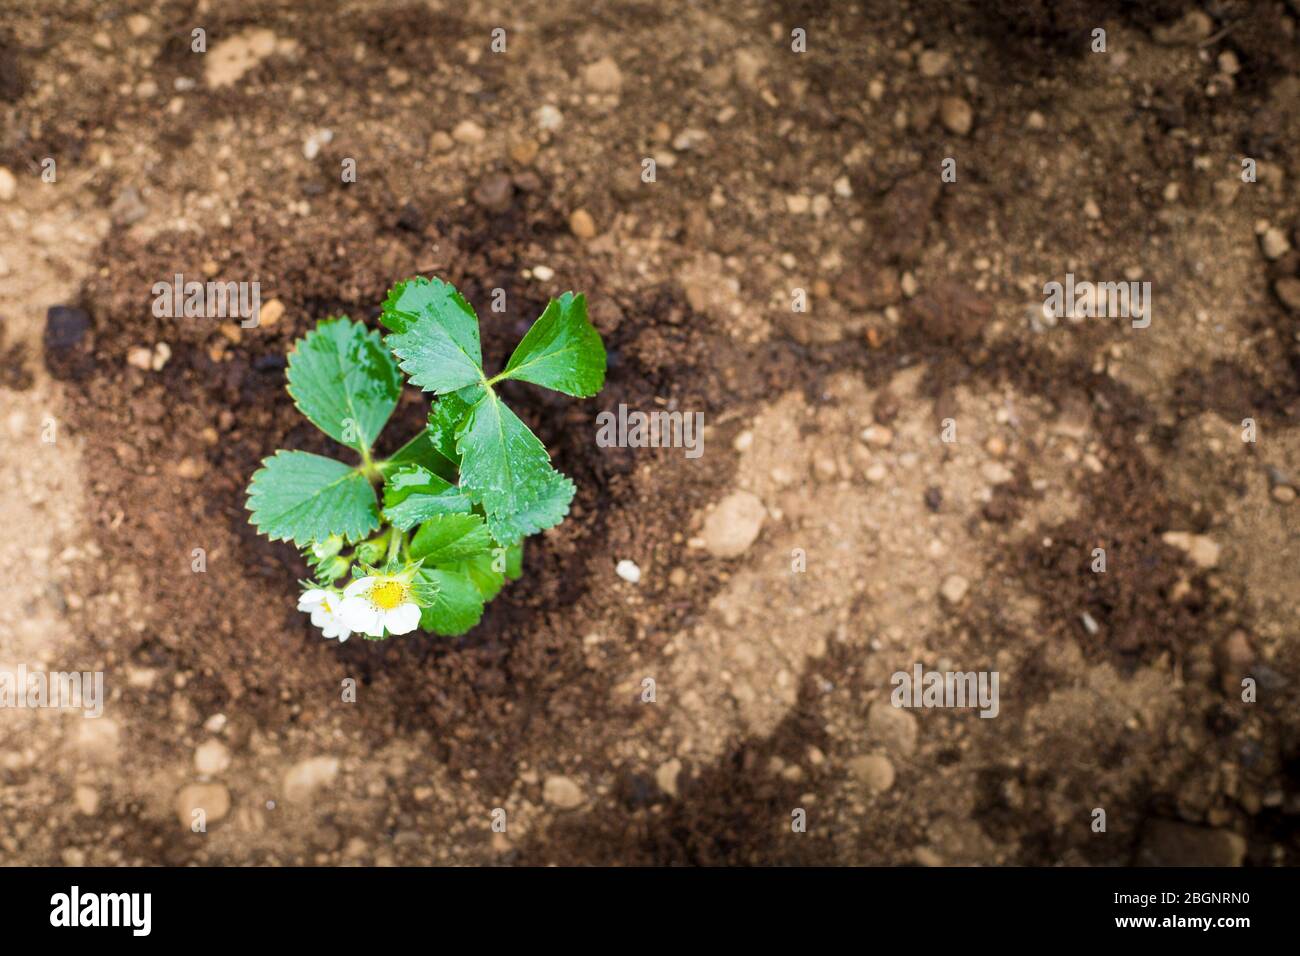 A small strawberry plant in wet ground, aerial top view. Home-growing vegetables and fruit is a nice activity idea during covid-19 lockdown pandemic. Stock Photo